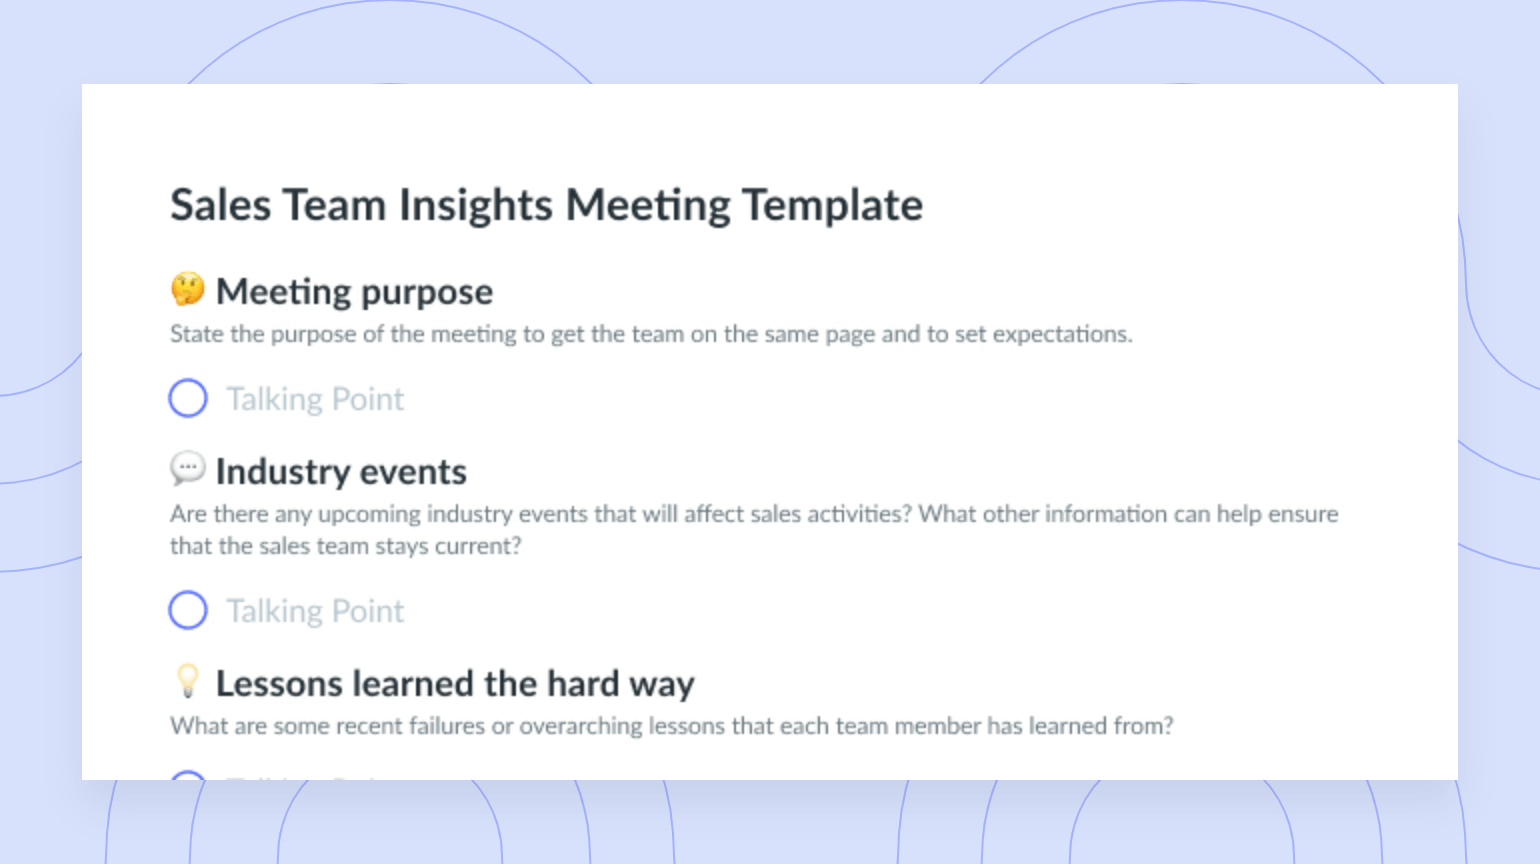 Sales Team Insights Meeting Template